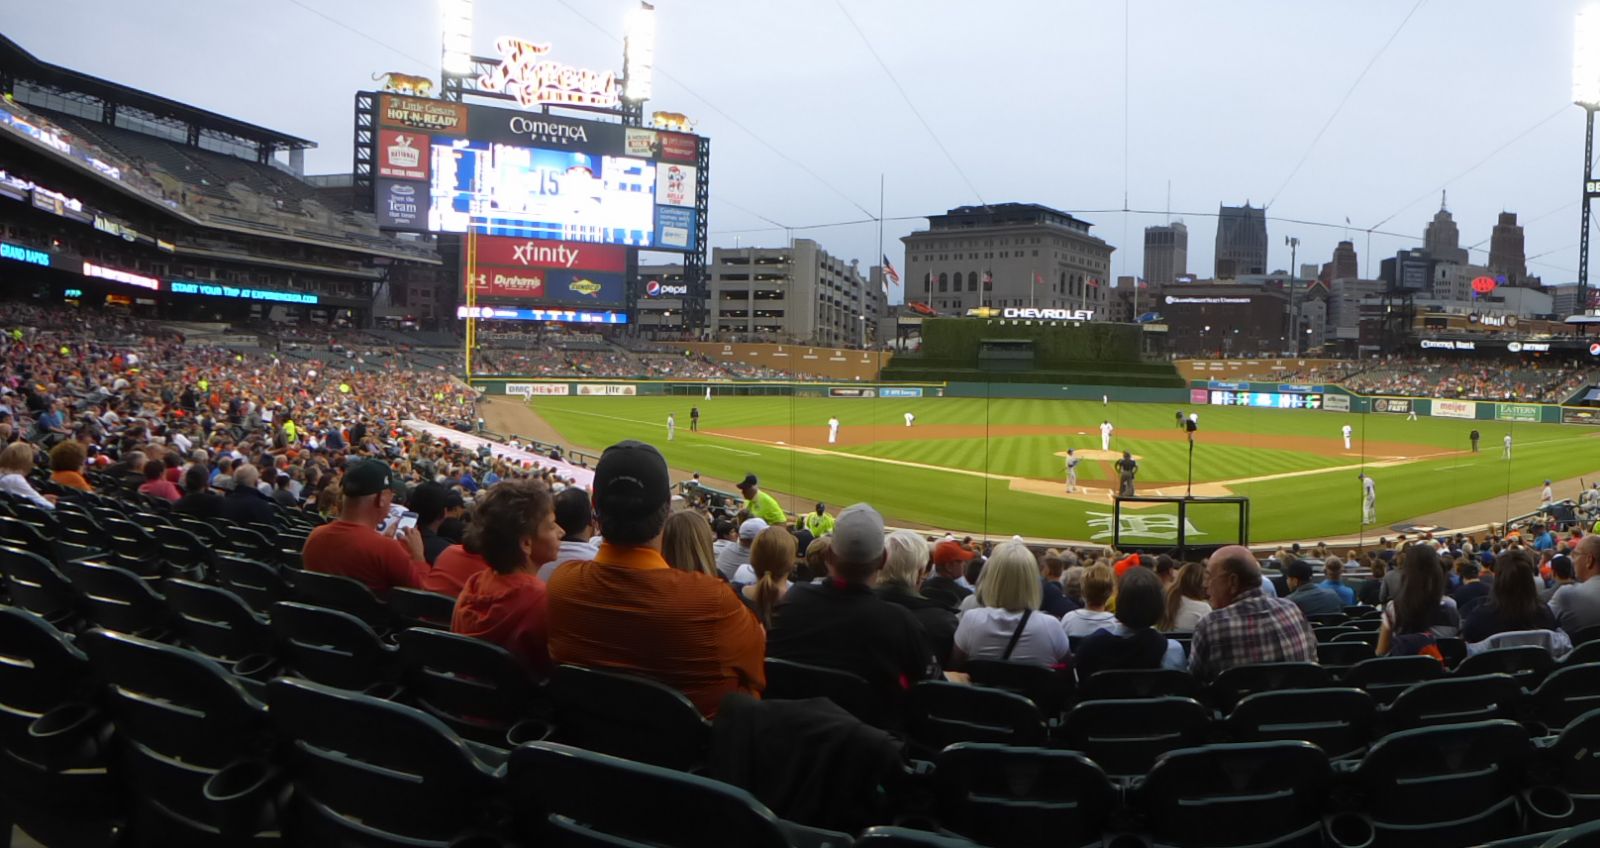 section 128, row 31 seat view  for baseball - comerica park